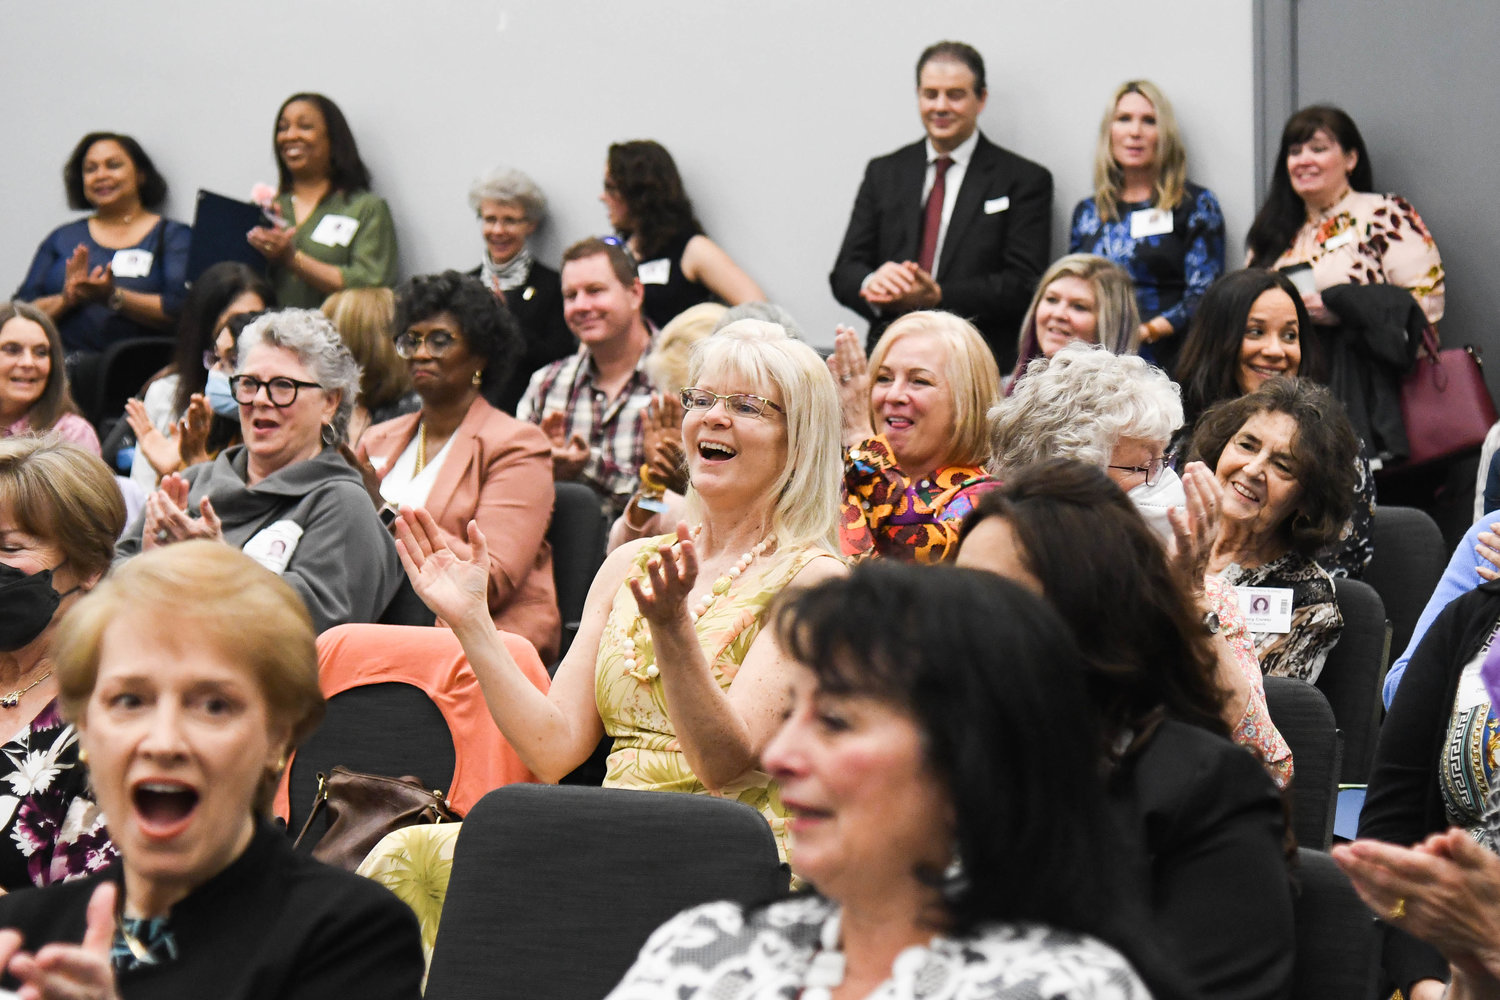 CELEBRATING WOMEN — Guests in attendance clap as citations are handed out during Assemblywoman Marianne Buttenschon’s 2022 Women of Distinction Award Ceremony on Wednesday at the Oneida County Office Building in Utica. The ceremony honored women in the 119th Assembly District for their contributions to the community. This year, more than 80 women were nominated by their friends and neighbors in the Mohawk Valley, accoding to Buttenschon’s office. See story, page 2.